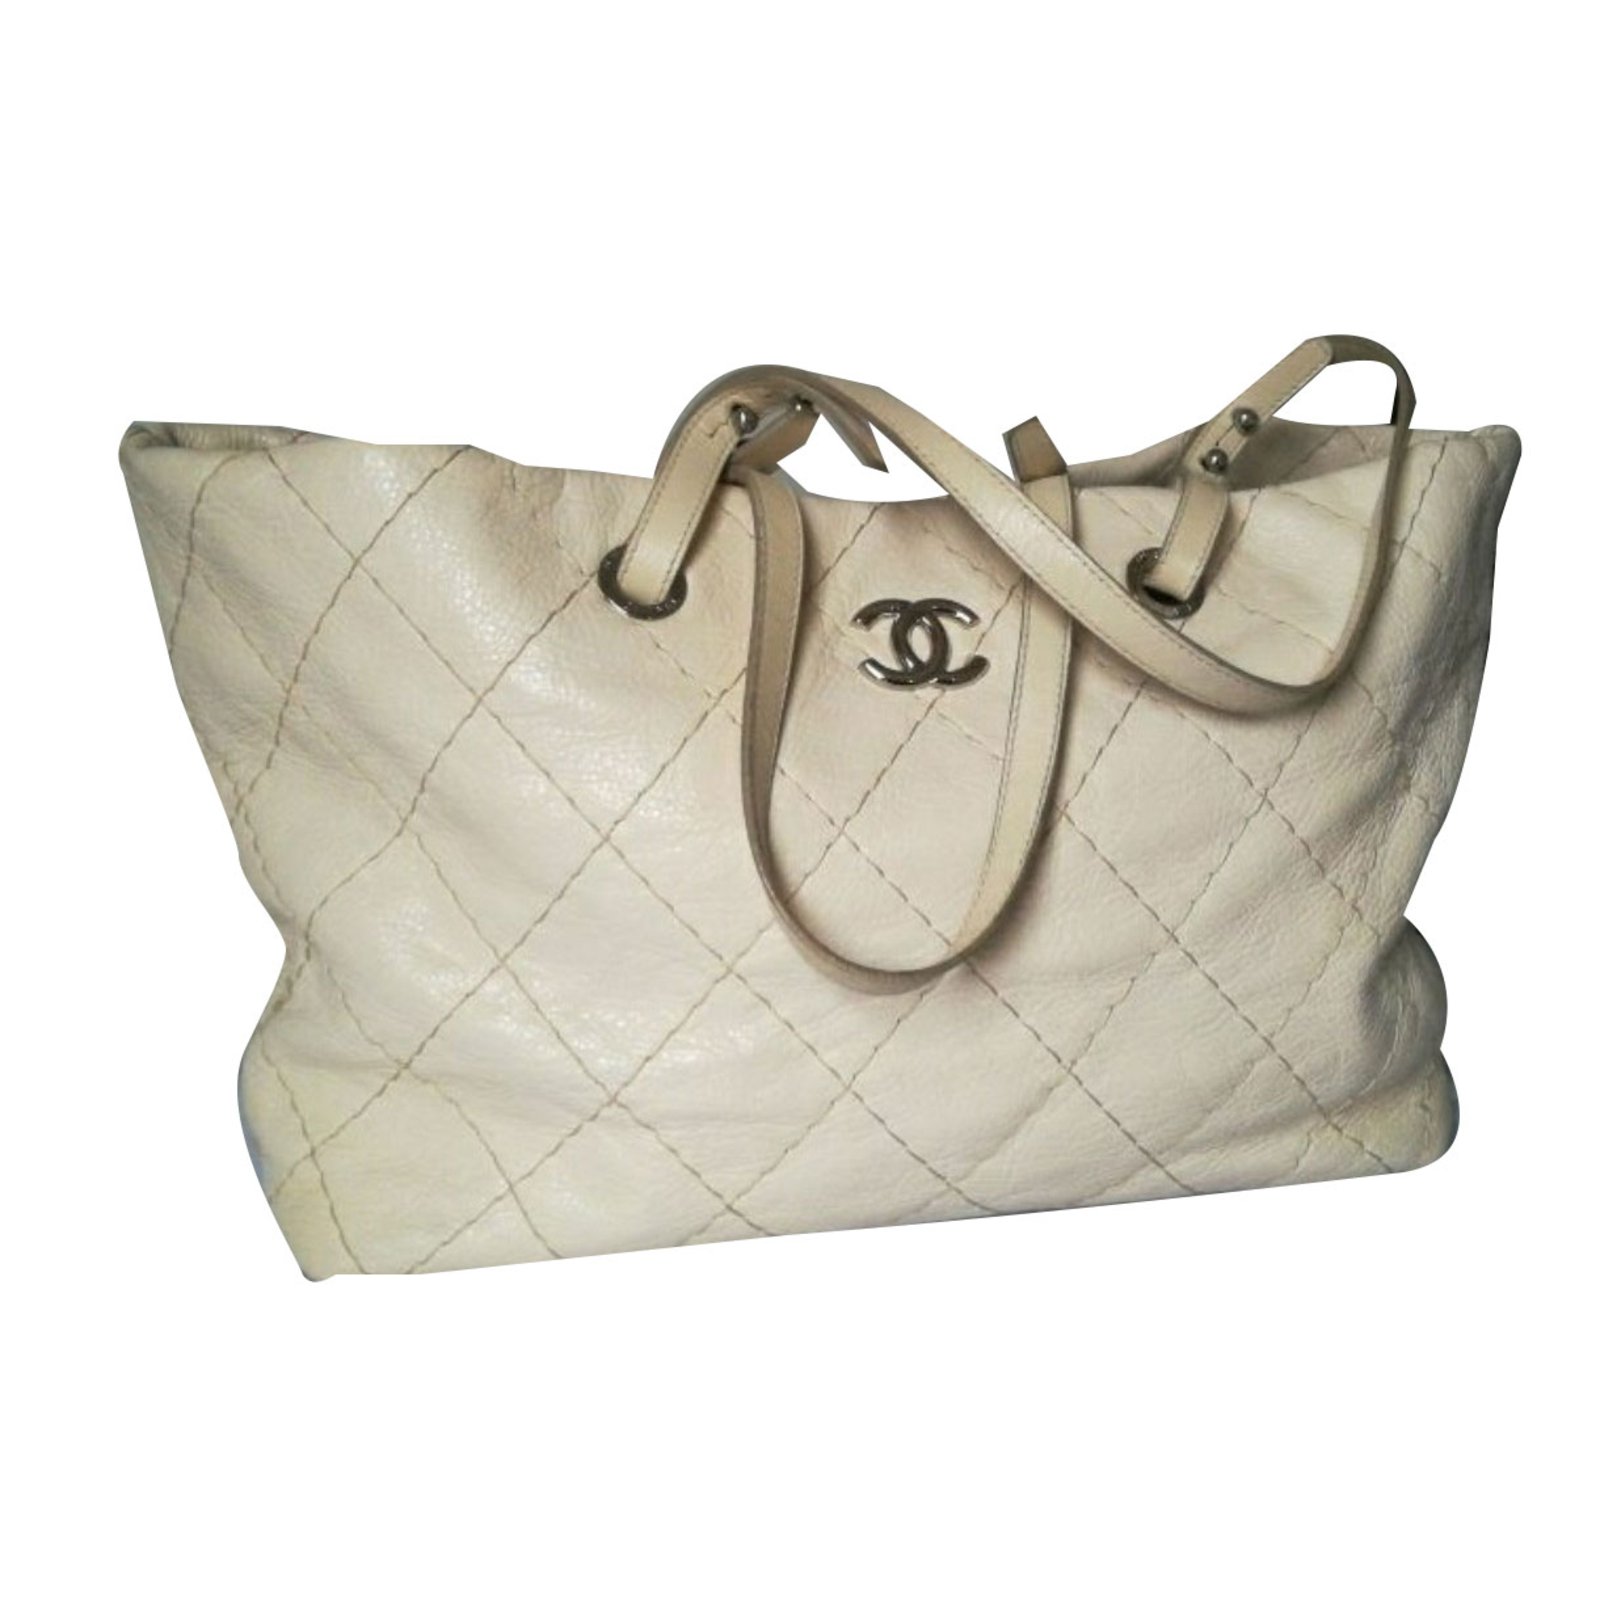 Chanel 'On the Road' Tote, Chanel Handbags